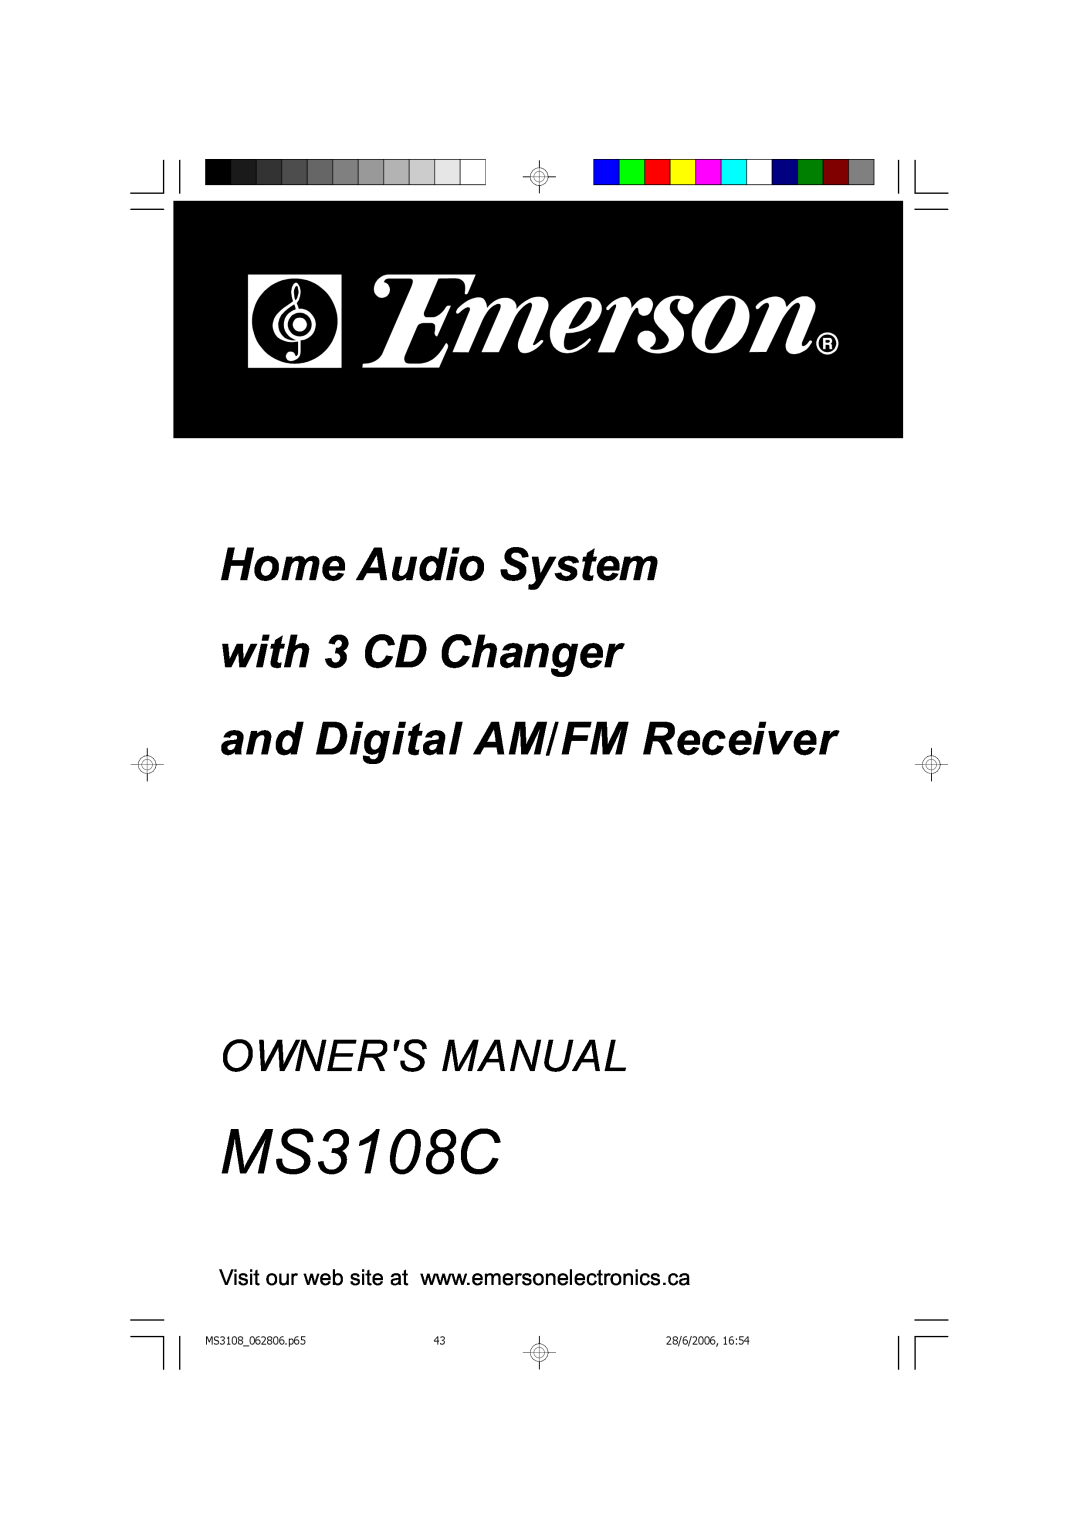 Emerson MS3108C owner manual Home Audio System with 3 CD Changer, and Digital AM/FM Receiver, MS3108 062806.p6543 